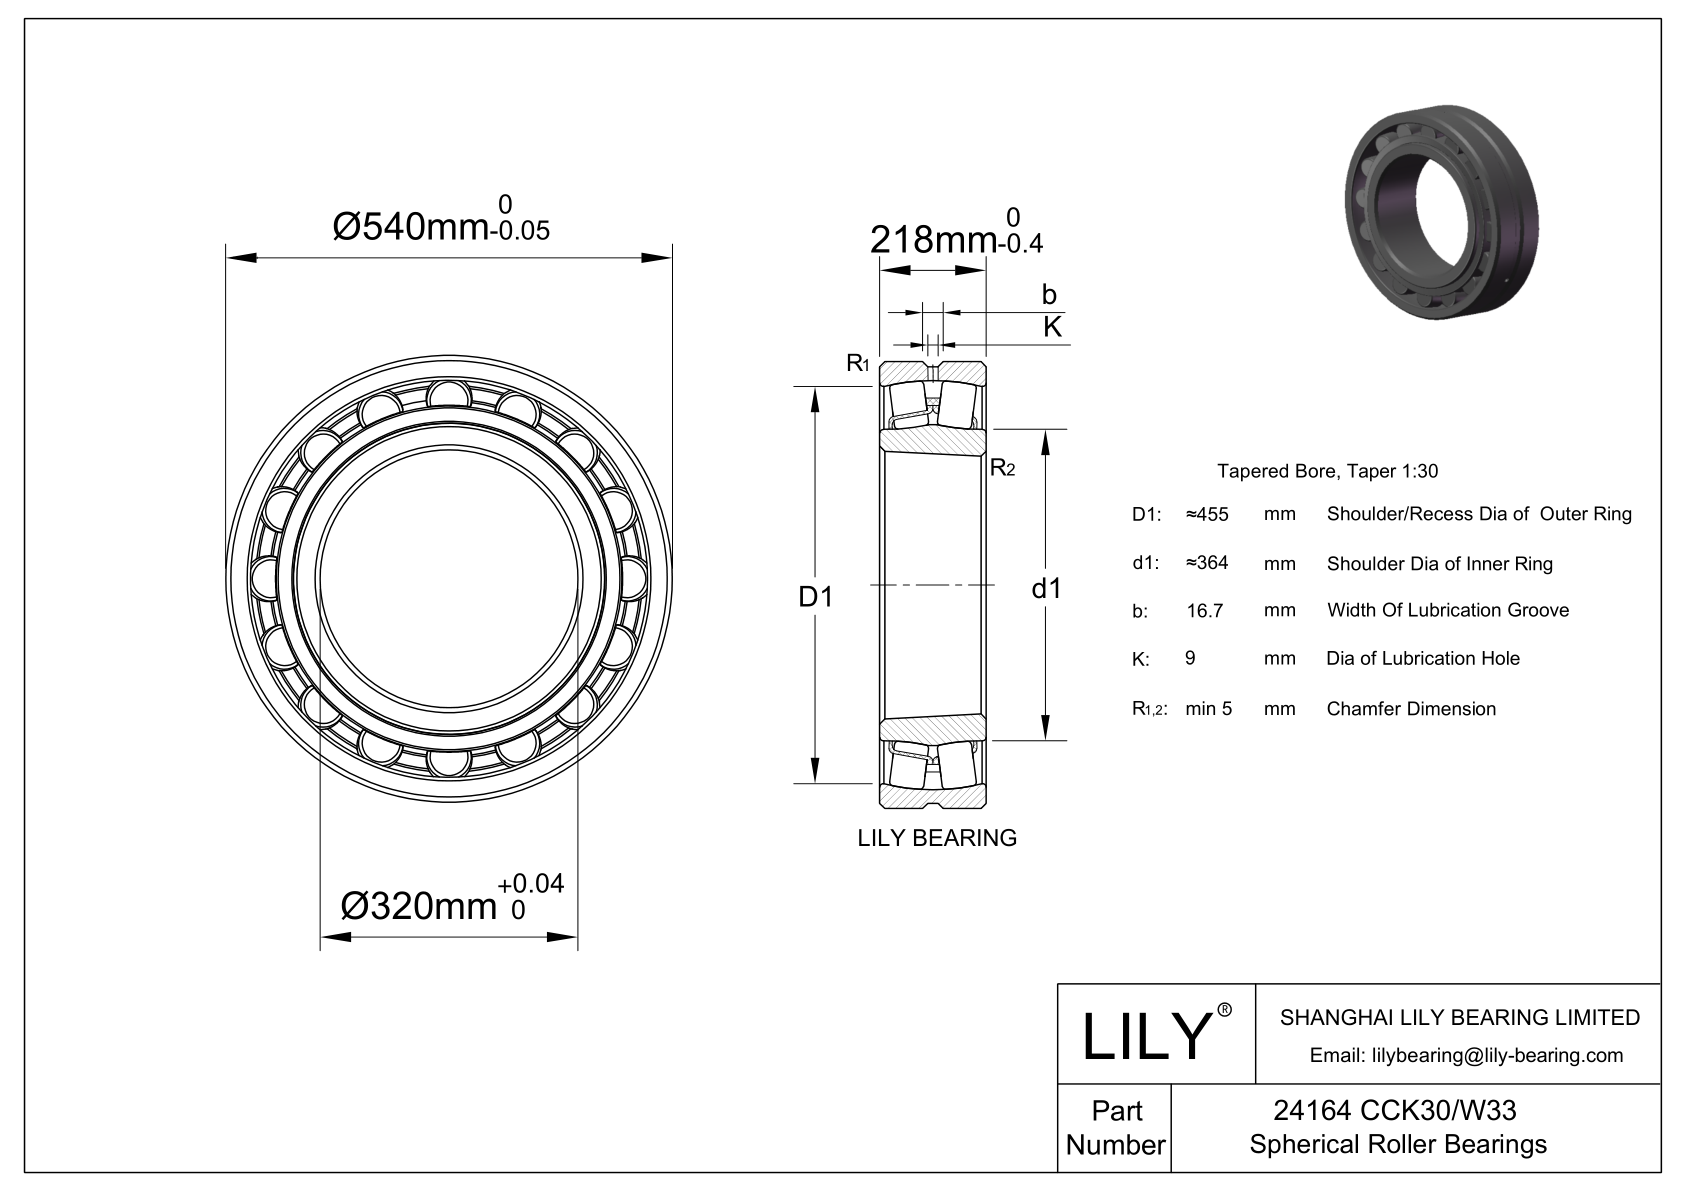 24164 CCK30/W33 Double Row Spherical Roller Bearing cad drawing